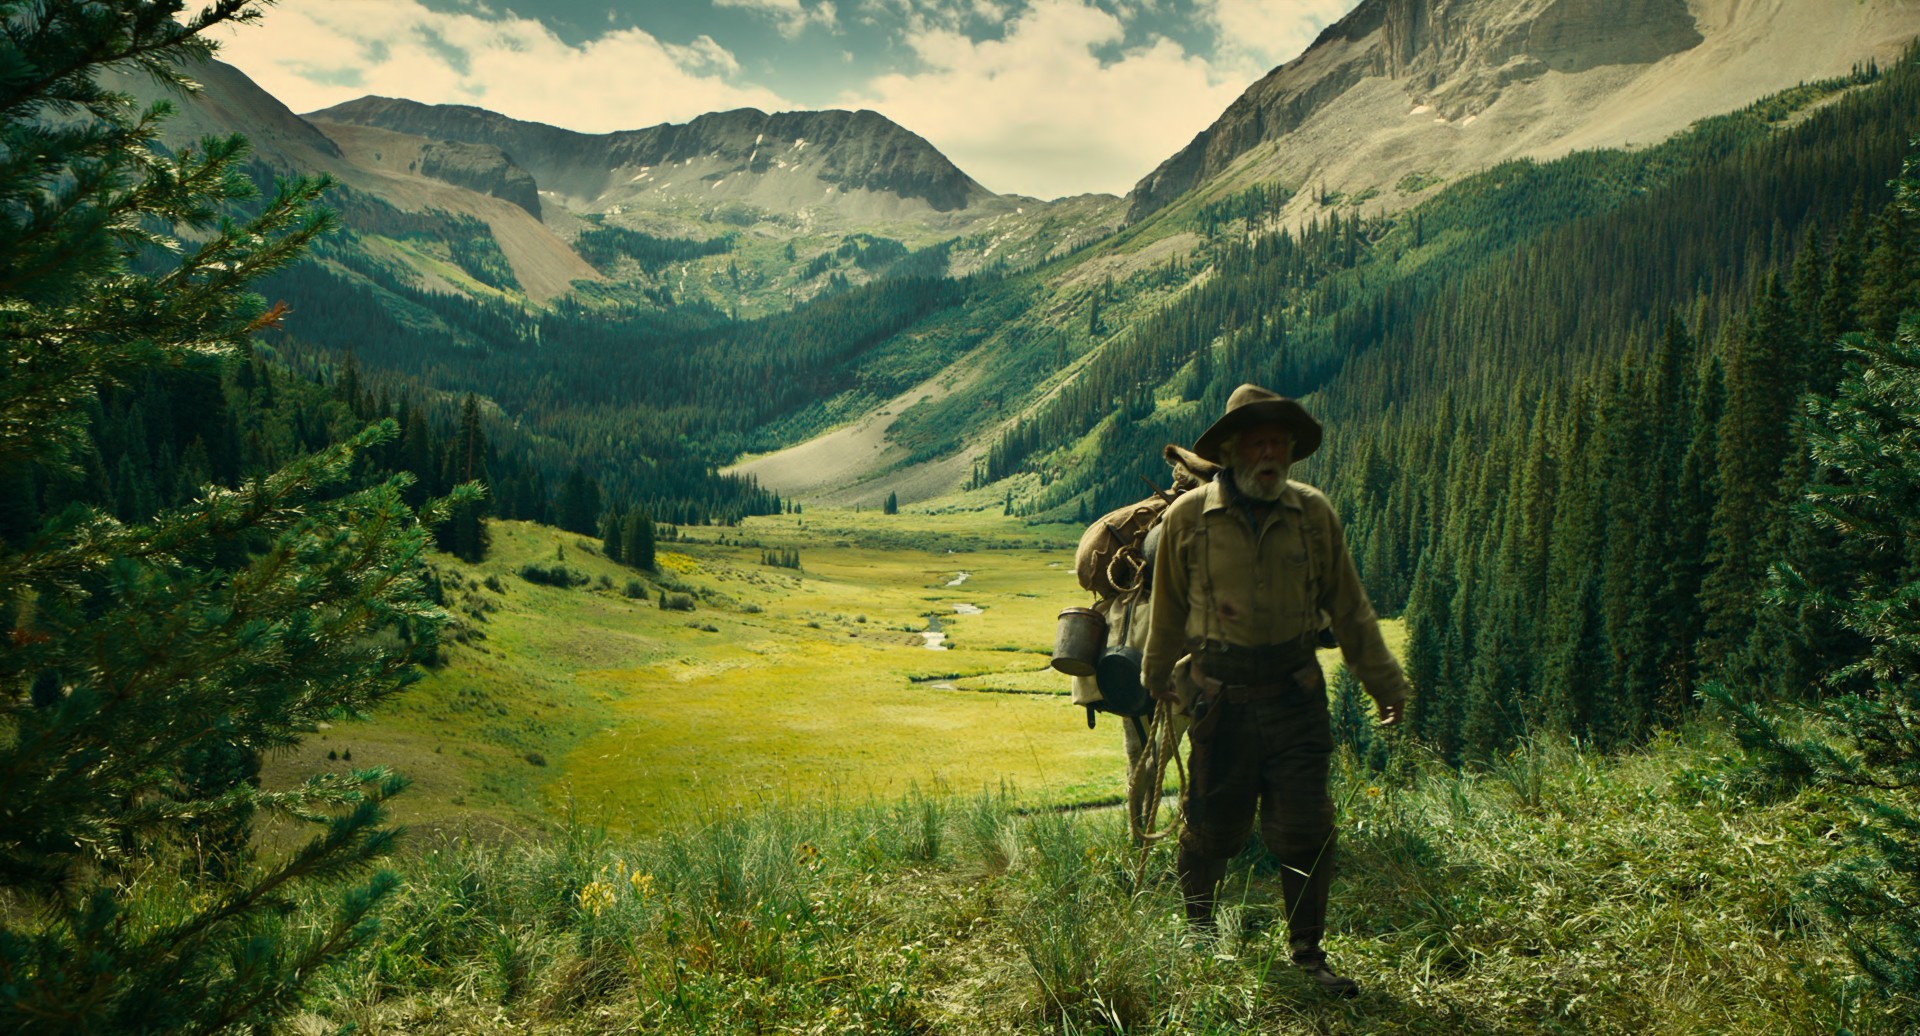 The Coen Brothers' The Ballad of Buster Scruggs Offers Whimsy But